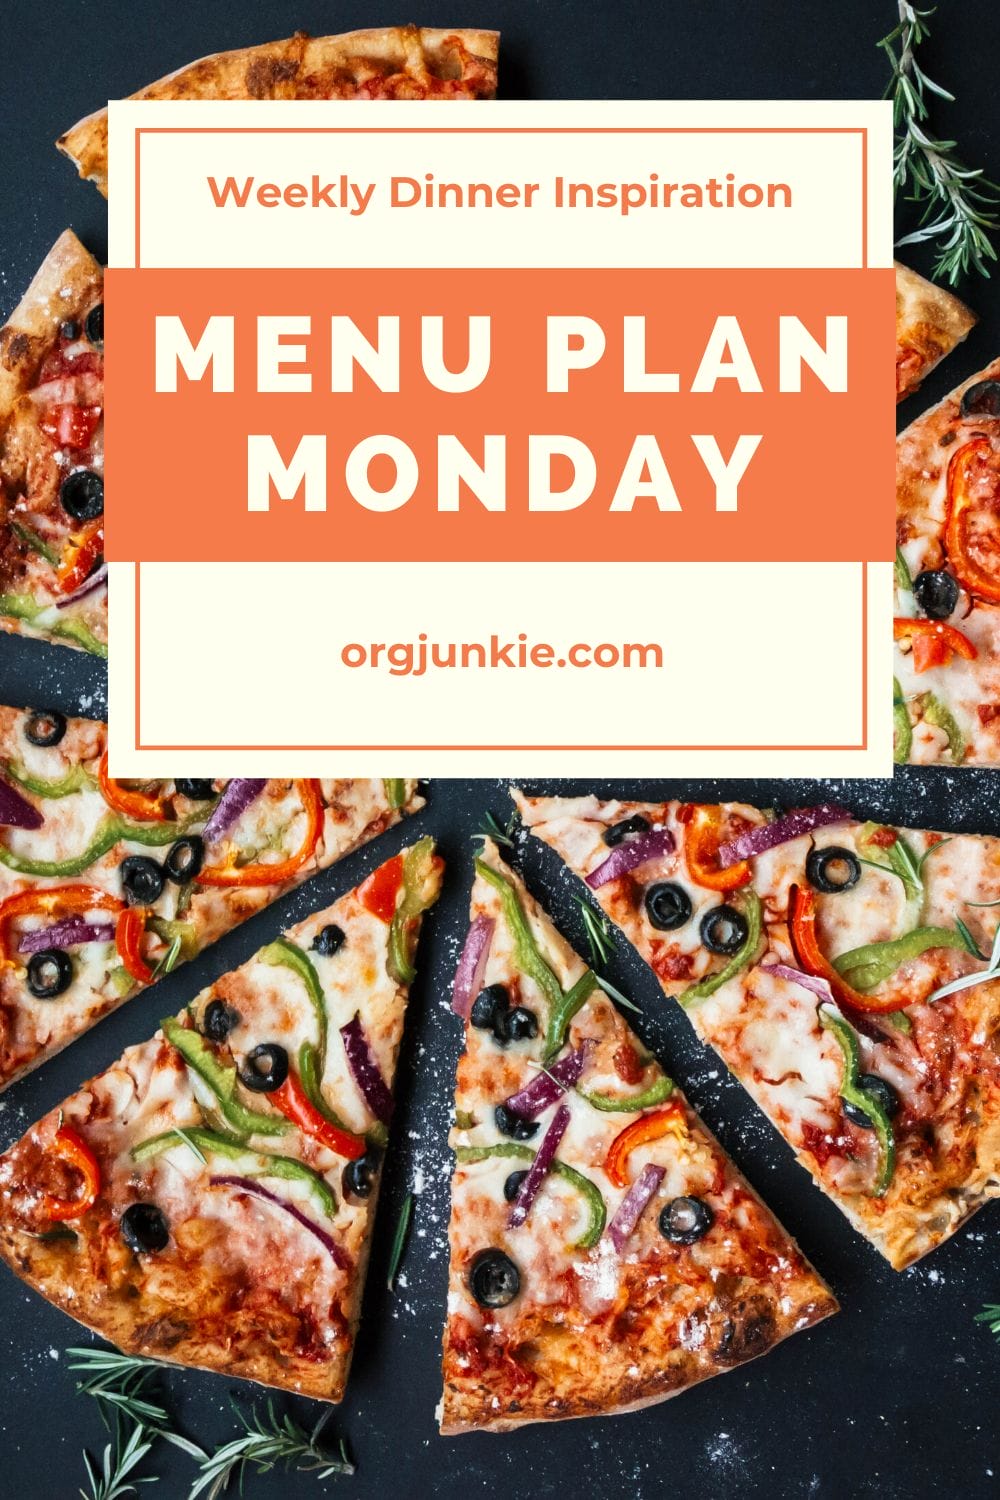 Menu Plan Monday for the week of March 30/20 ~ weekly dinner inspiration to help you get dinner on the table each night with less stress and chaos